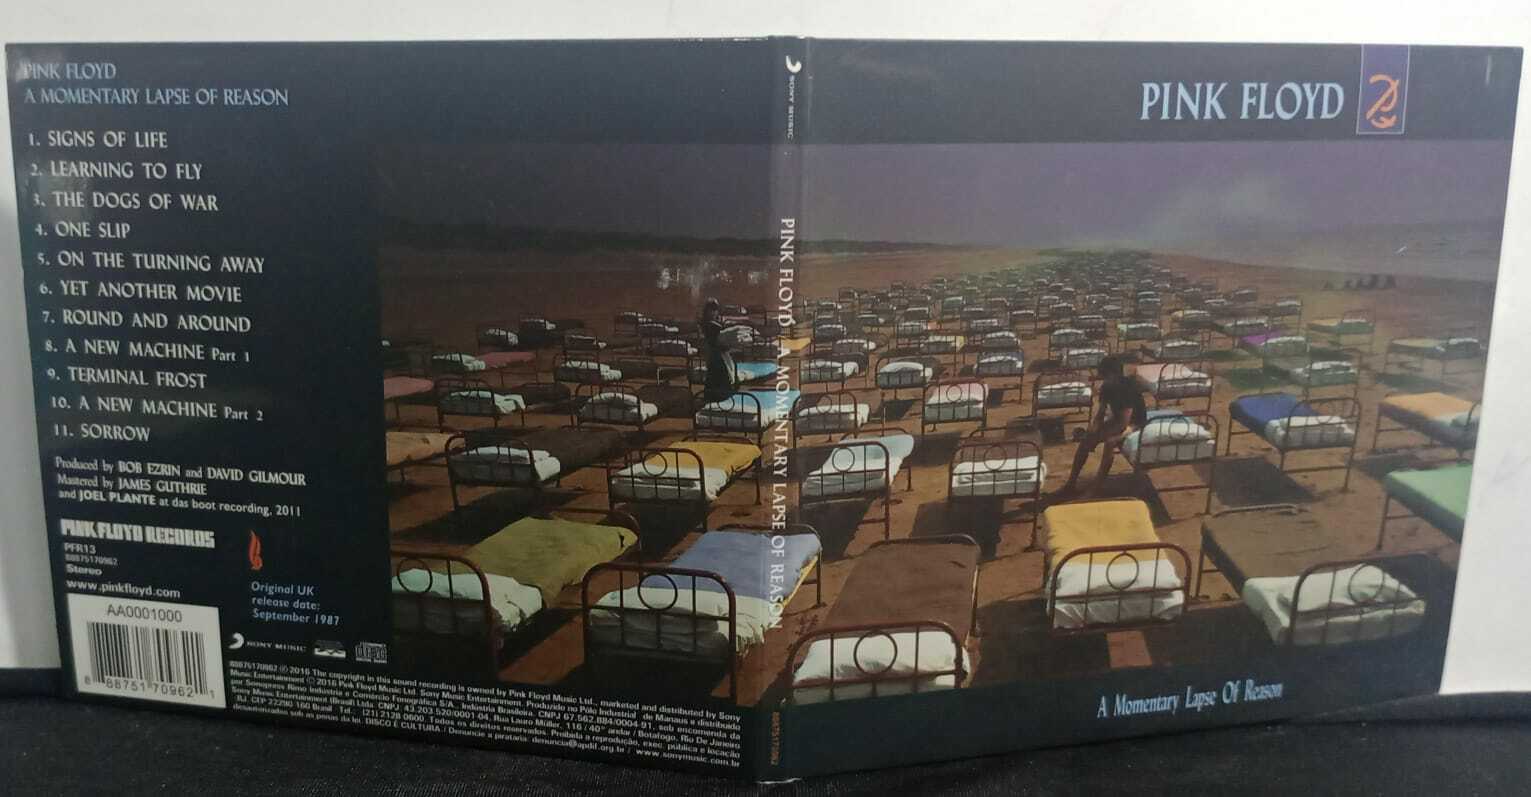 CD - Pink Floyd - a Momentary Lapse of Reason